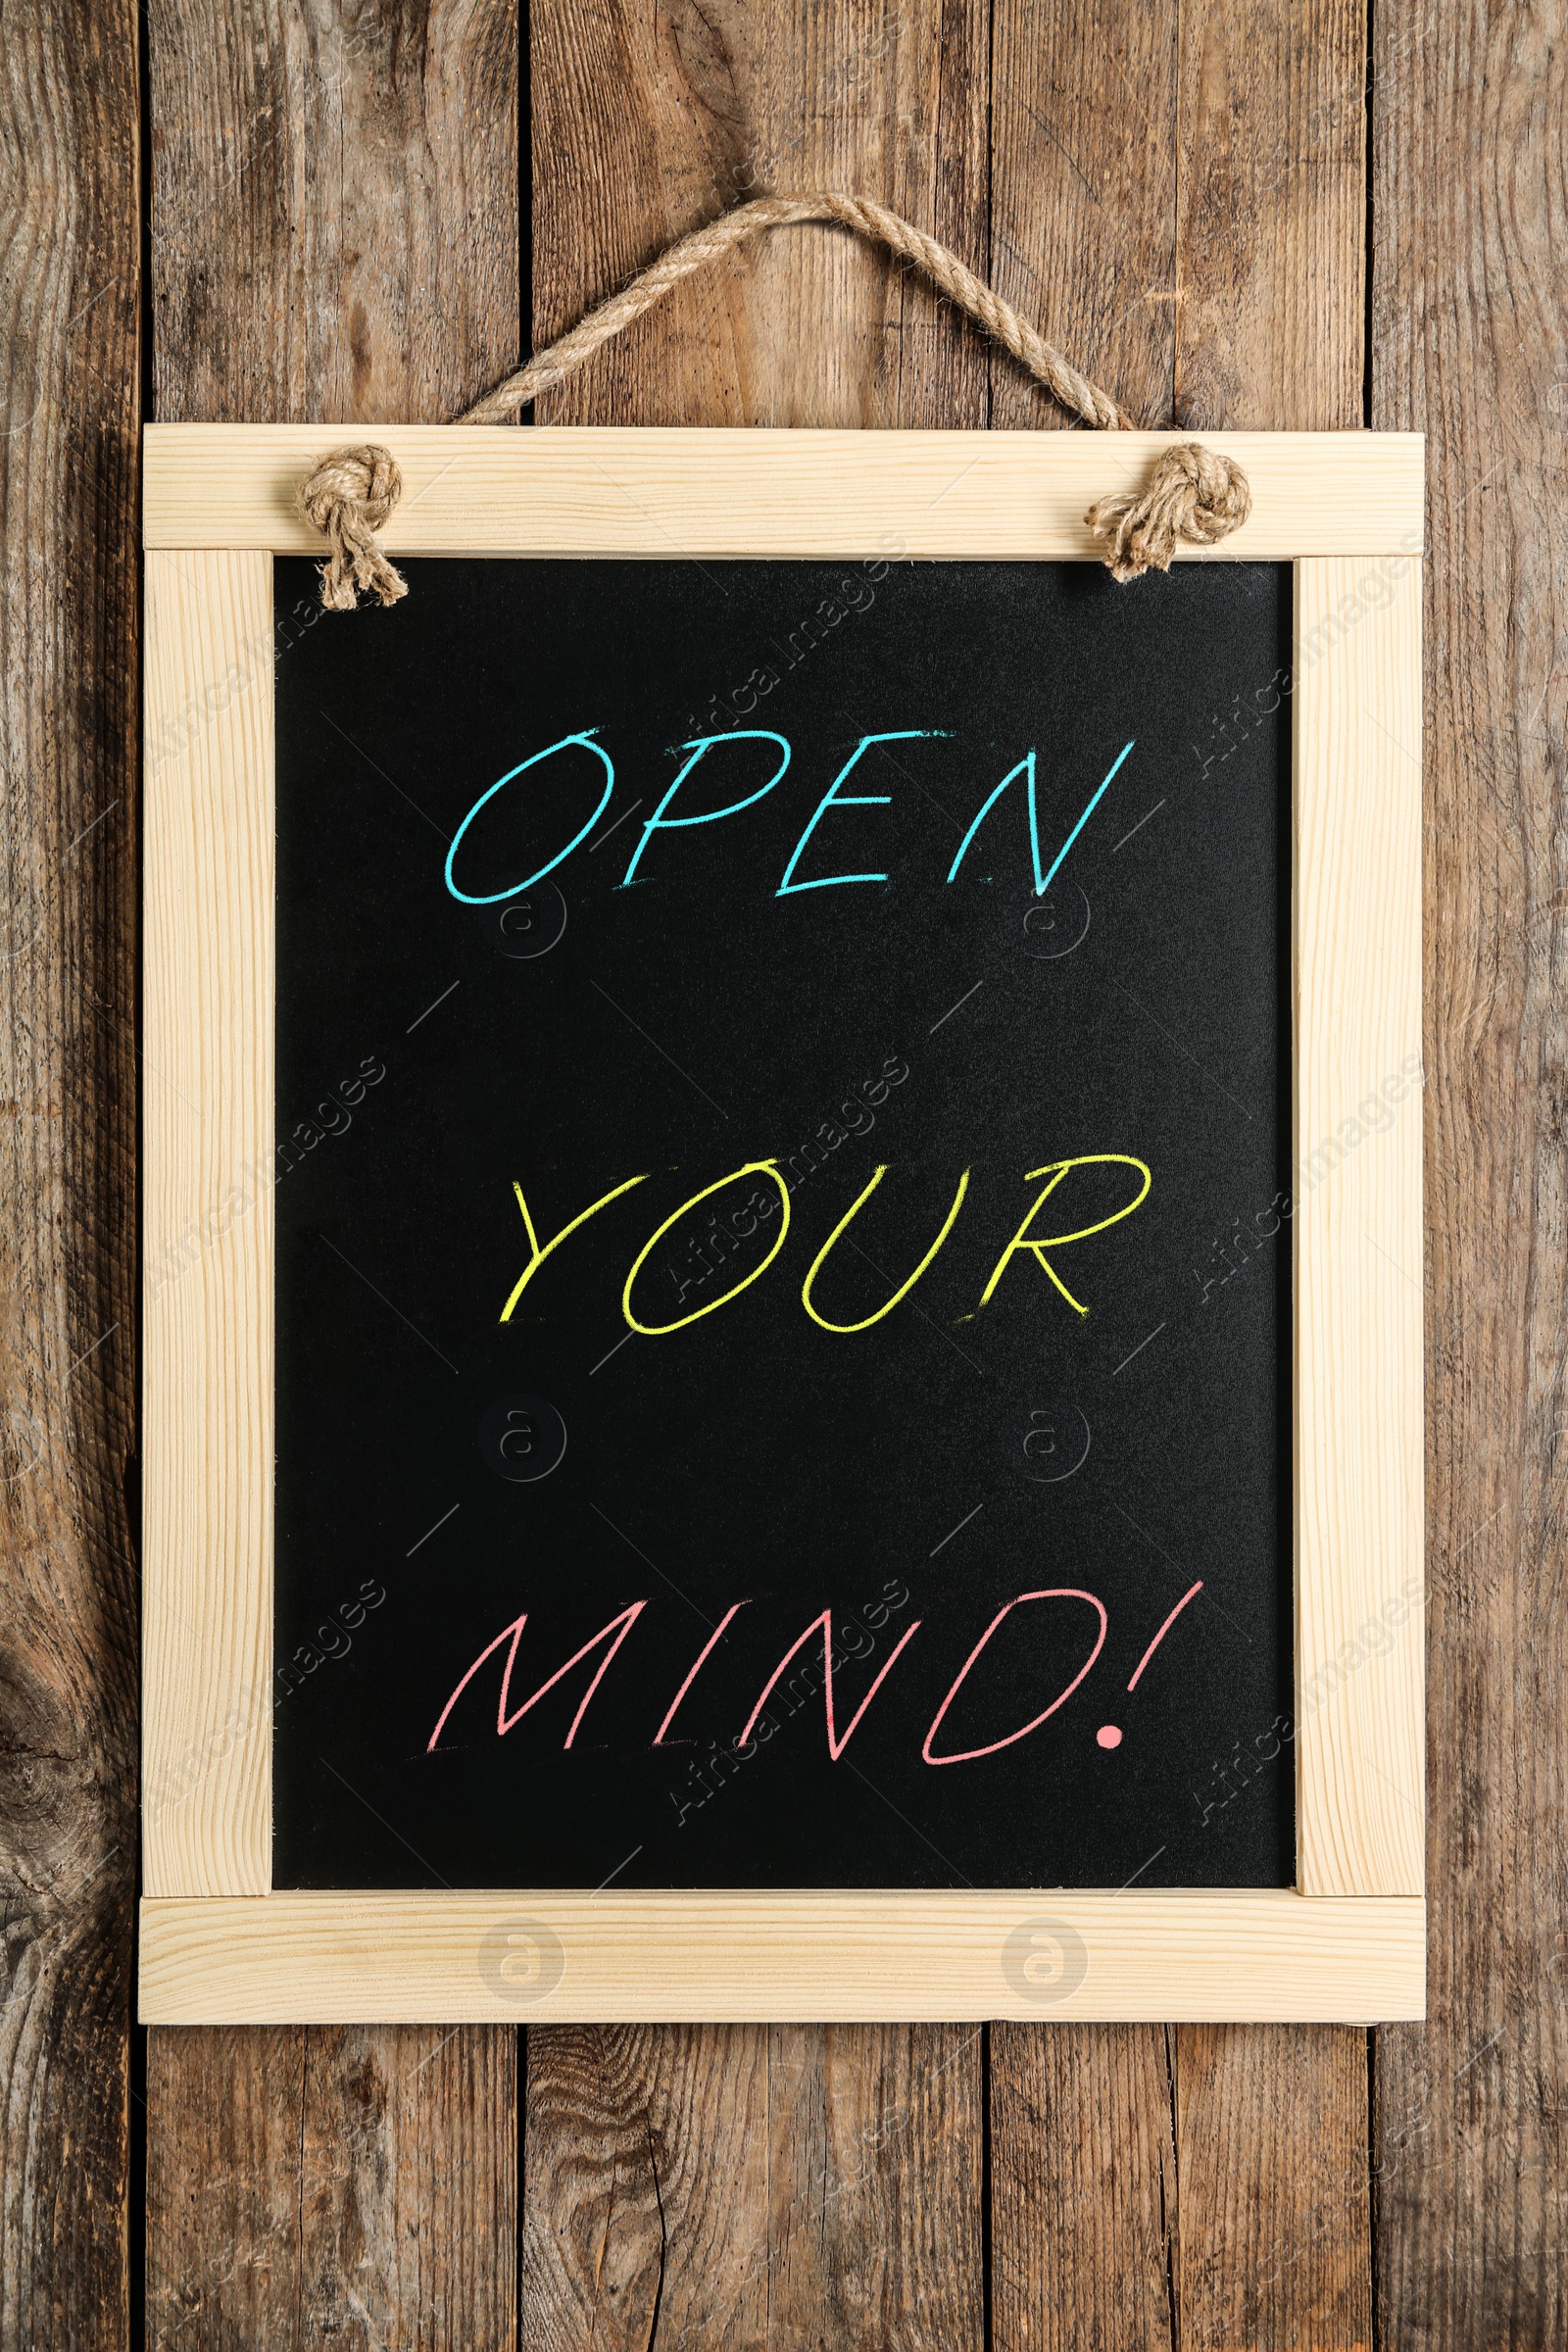 Image of Small chalkboard with motivational quote Open your mind hanging on wooden wall